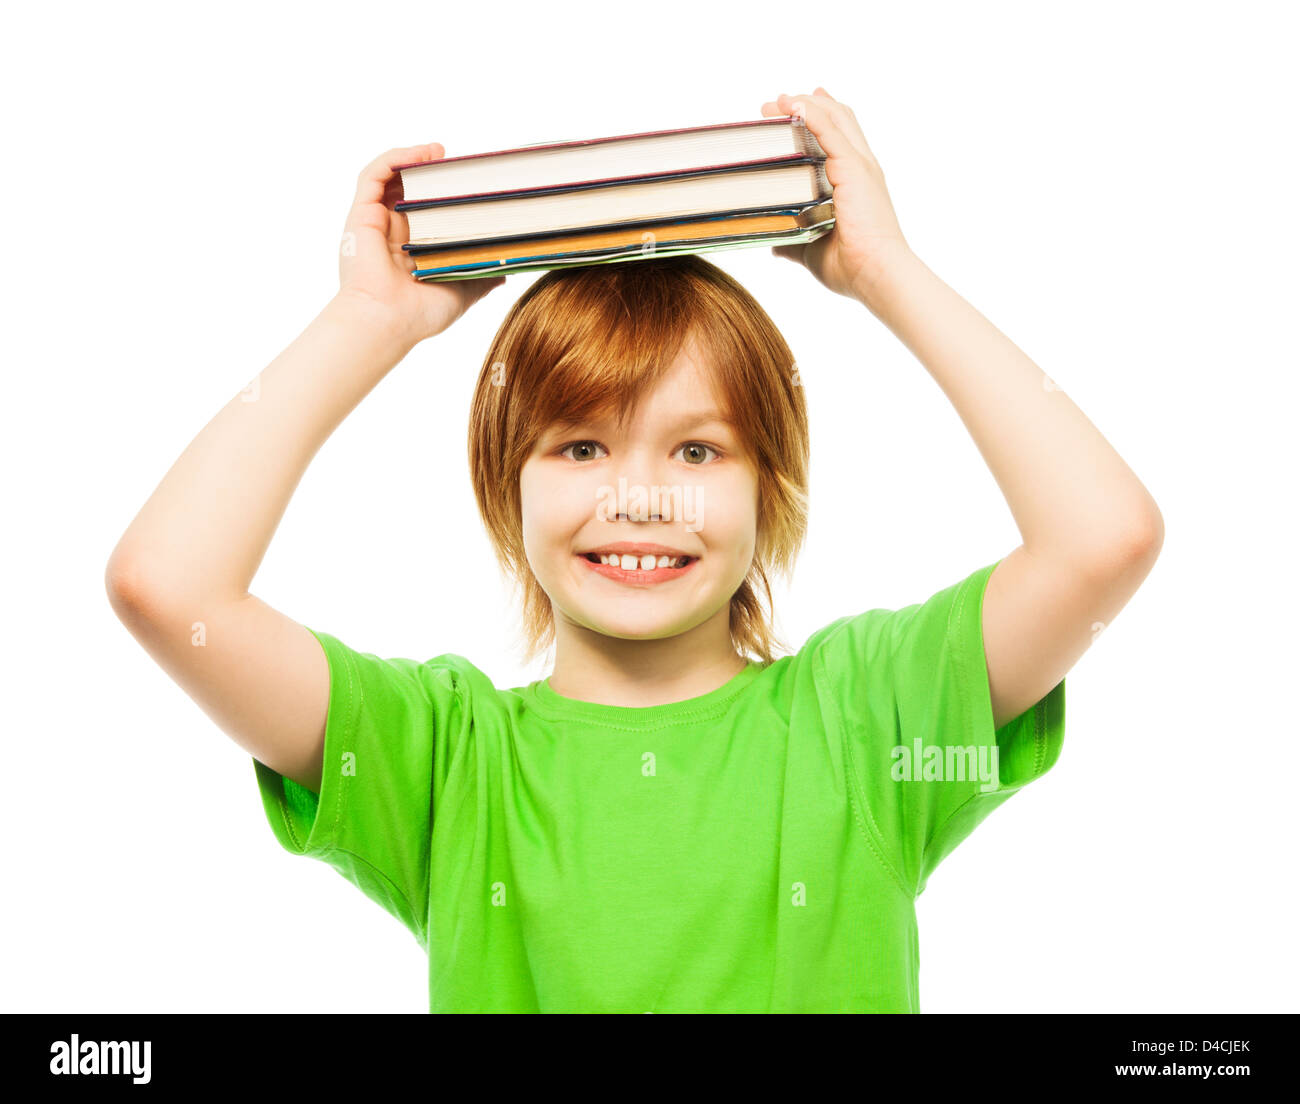 Happy Caucasian 9 years old boy in green shirt holding stack of books on top of head portrait, close-up portrait, isolated on white Stock Photo